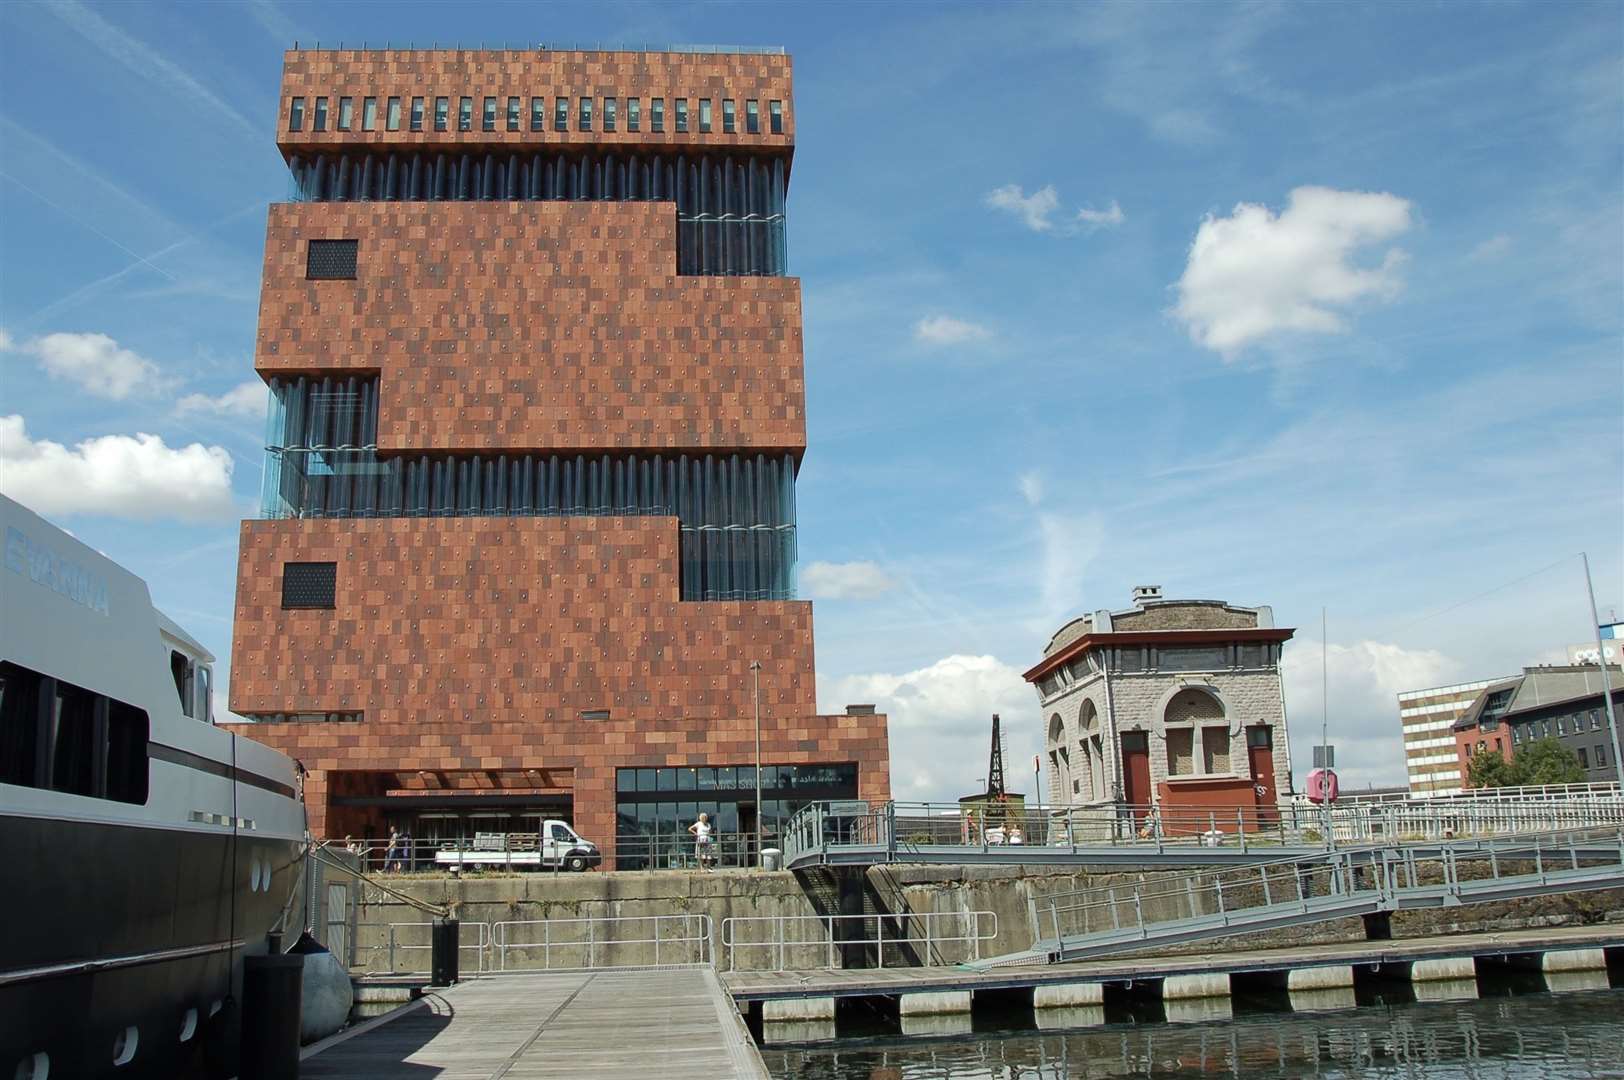 The MAS art gallery and museum in Antwerp